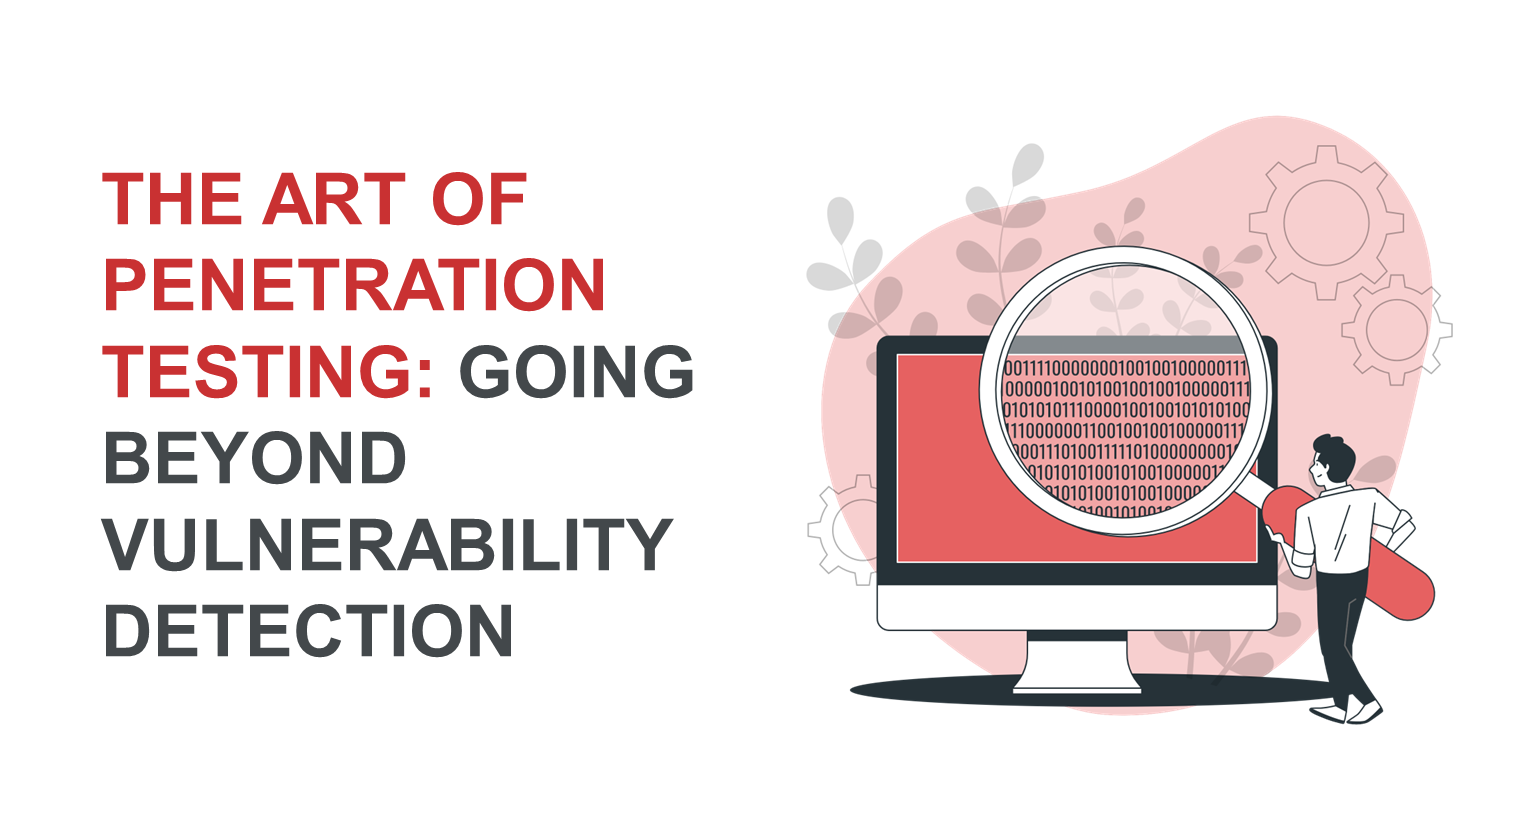 The Art of Penetration Testing: Going Beyond Vulnerability Detection